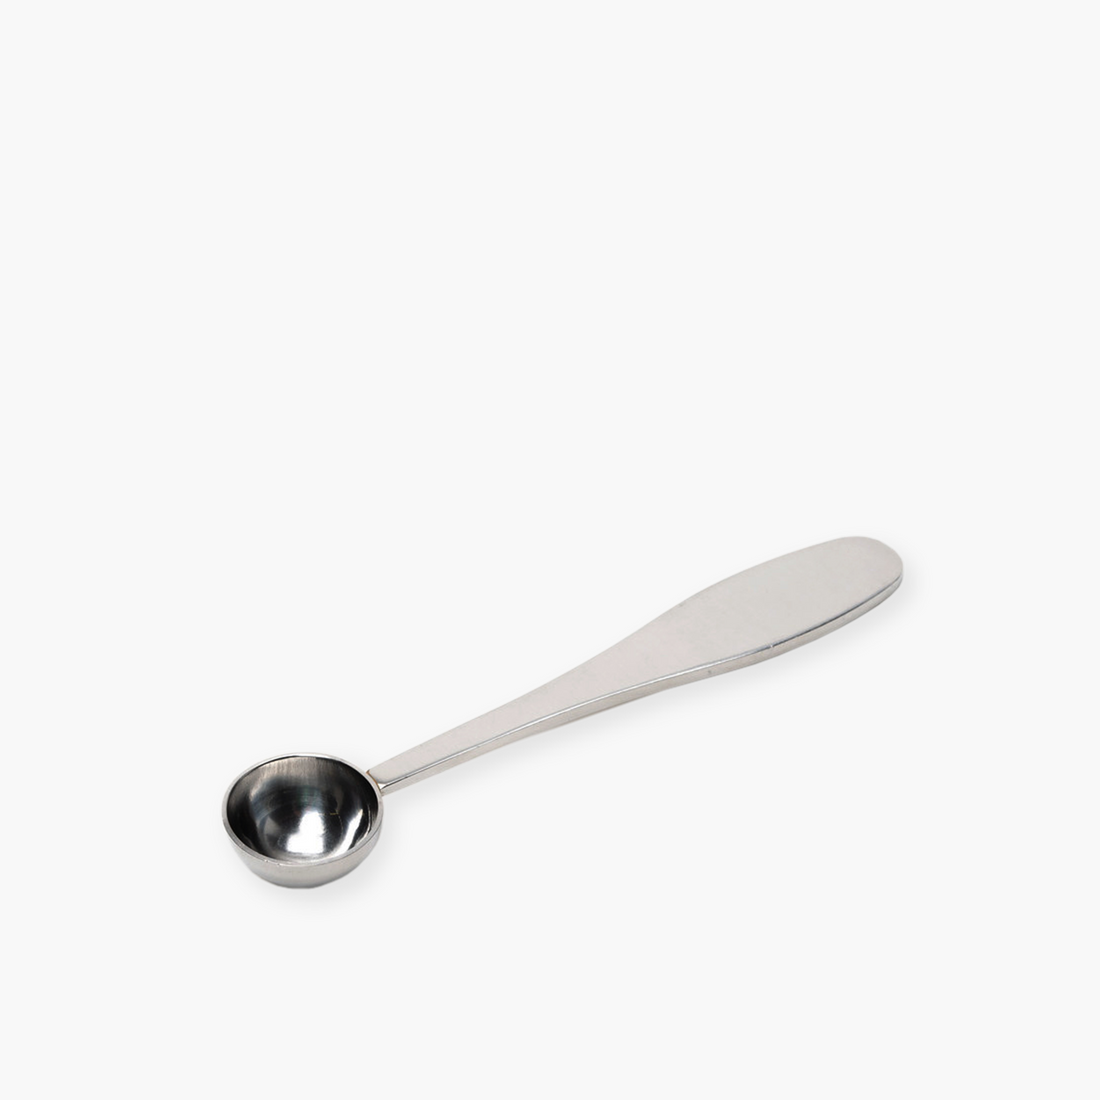 Matcha Spoon - Stainless Steel